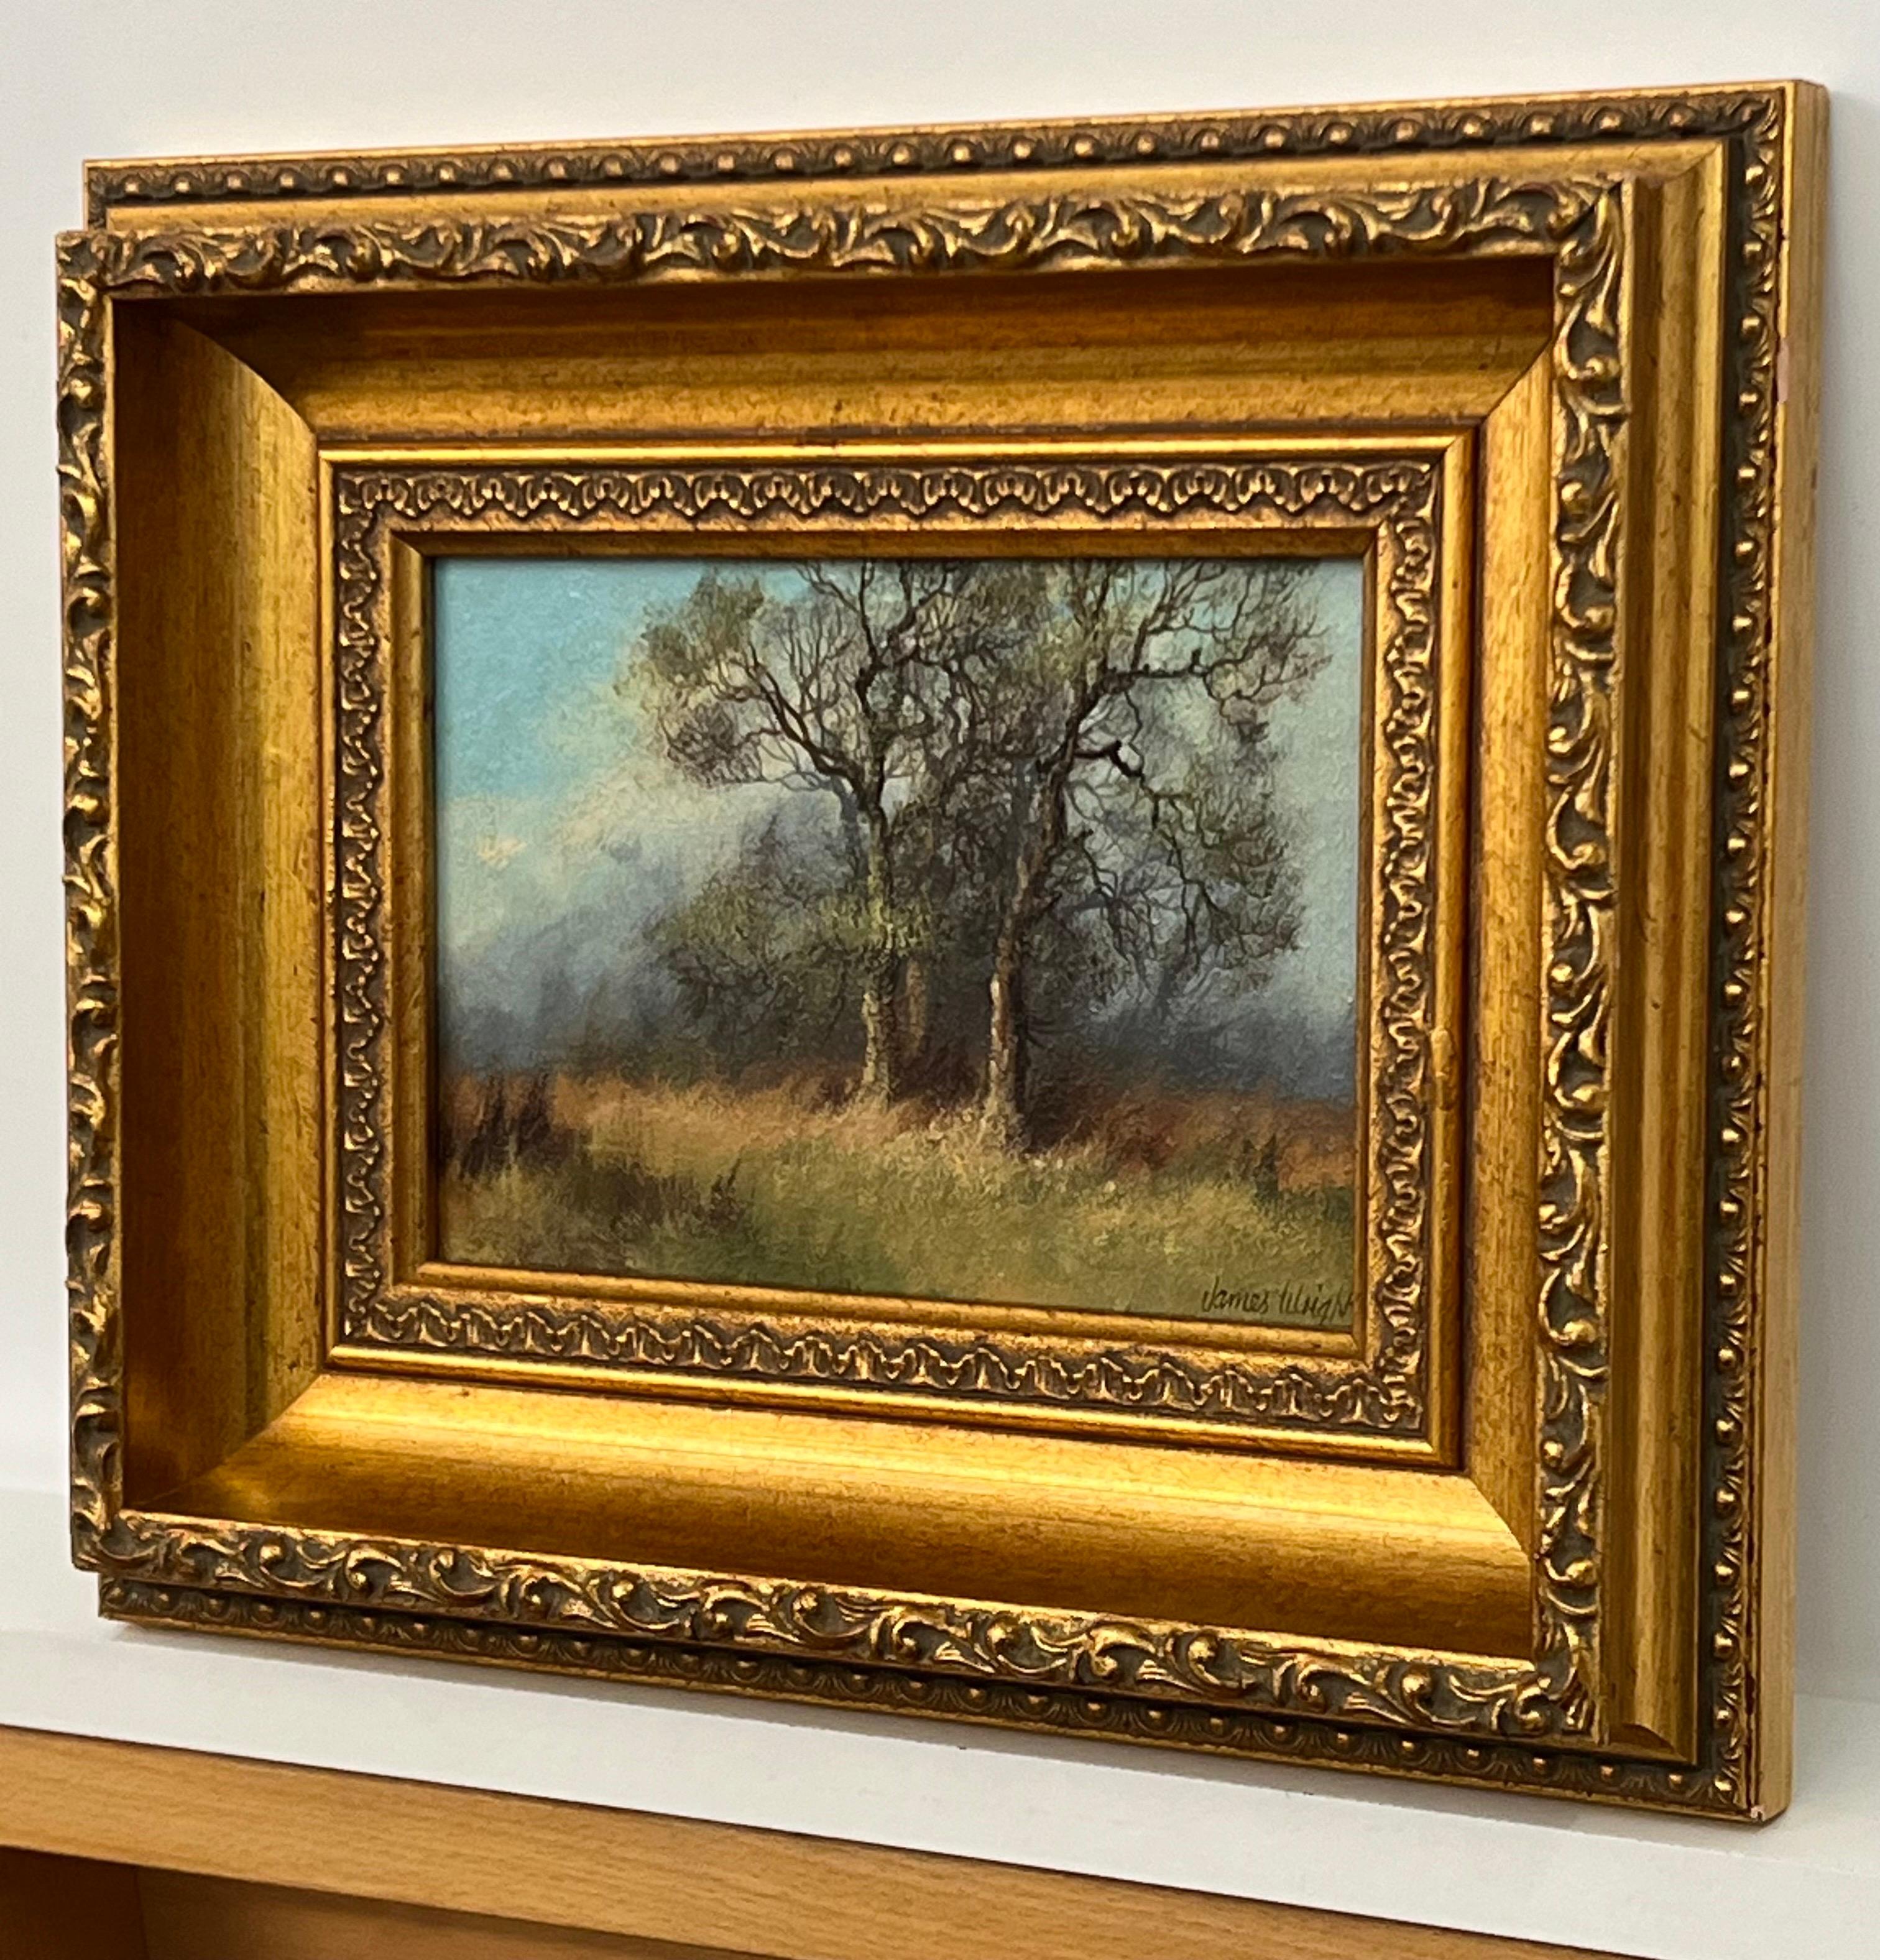 Tree Study & Field in the English Countryside by 20th Century British Landscape Artist, James Wright

Signed, Original, Oil on Canvas, housed in a beautiful ornate gold frame.
Provenance: Part of the English Heritage Series No.429

Art measures 7 x